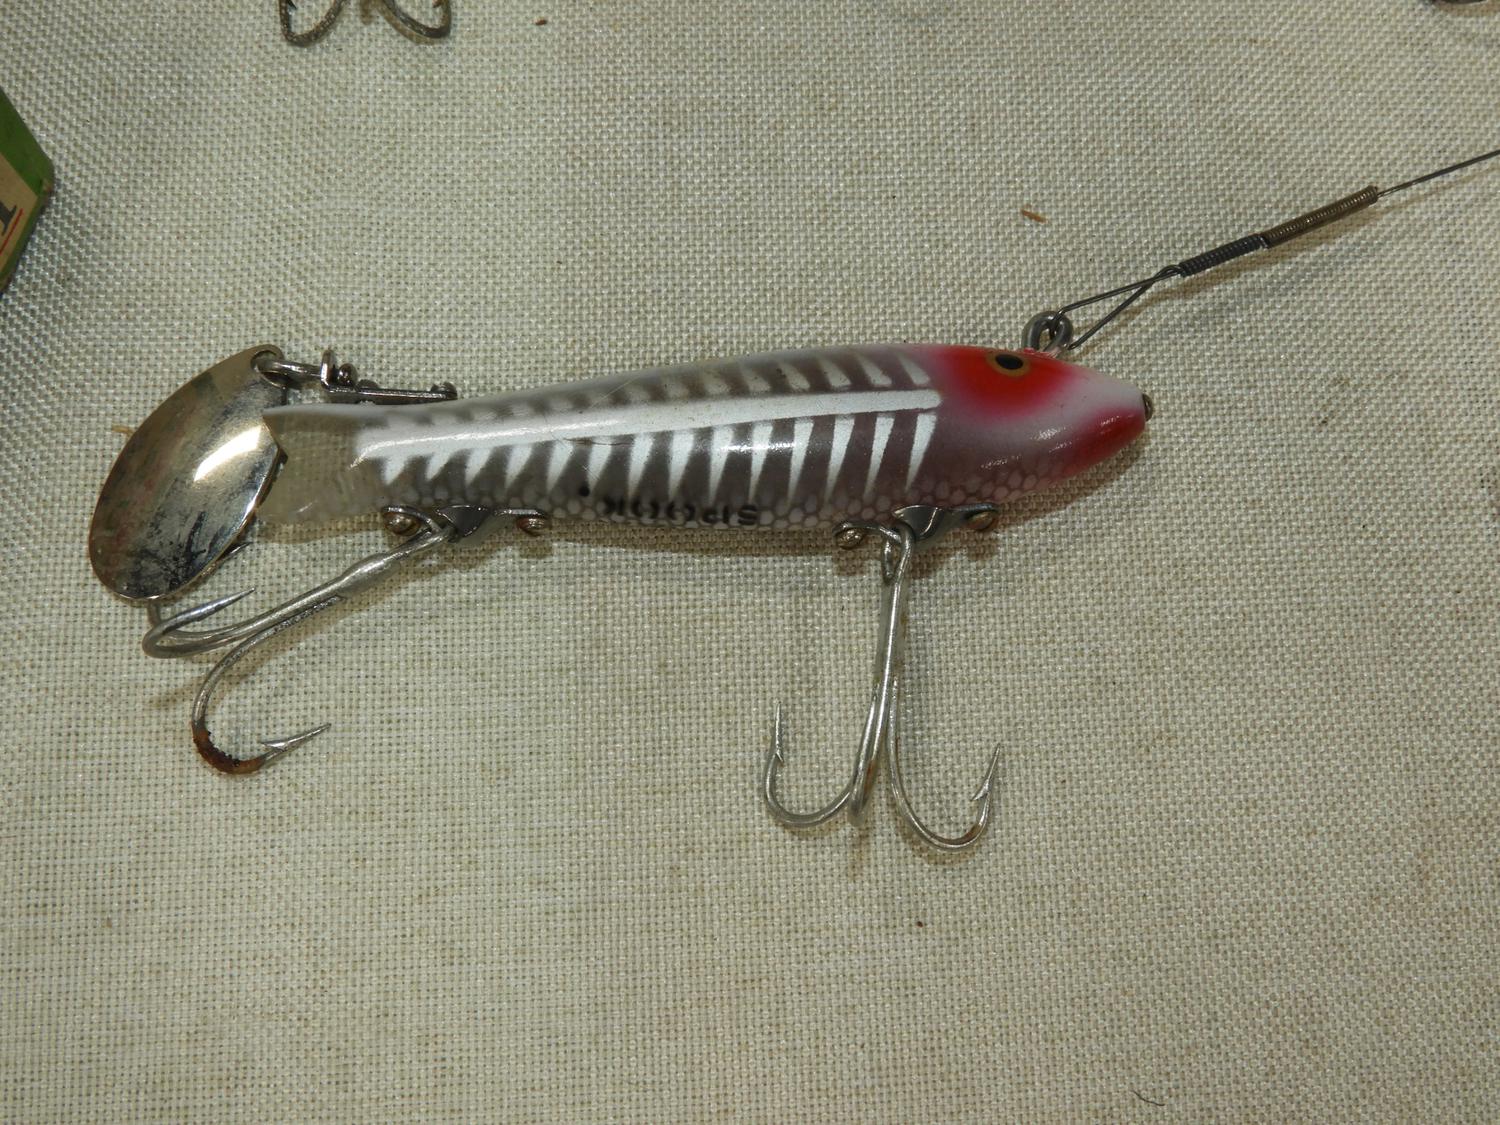 Murrays Auctioneers - Lot 265: Six vintage fishing lures with boxes  including Creek Chub Bait Co. of Garrett